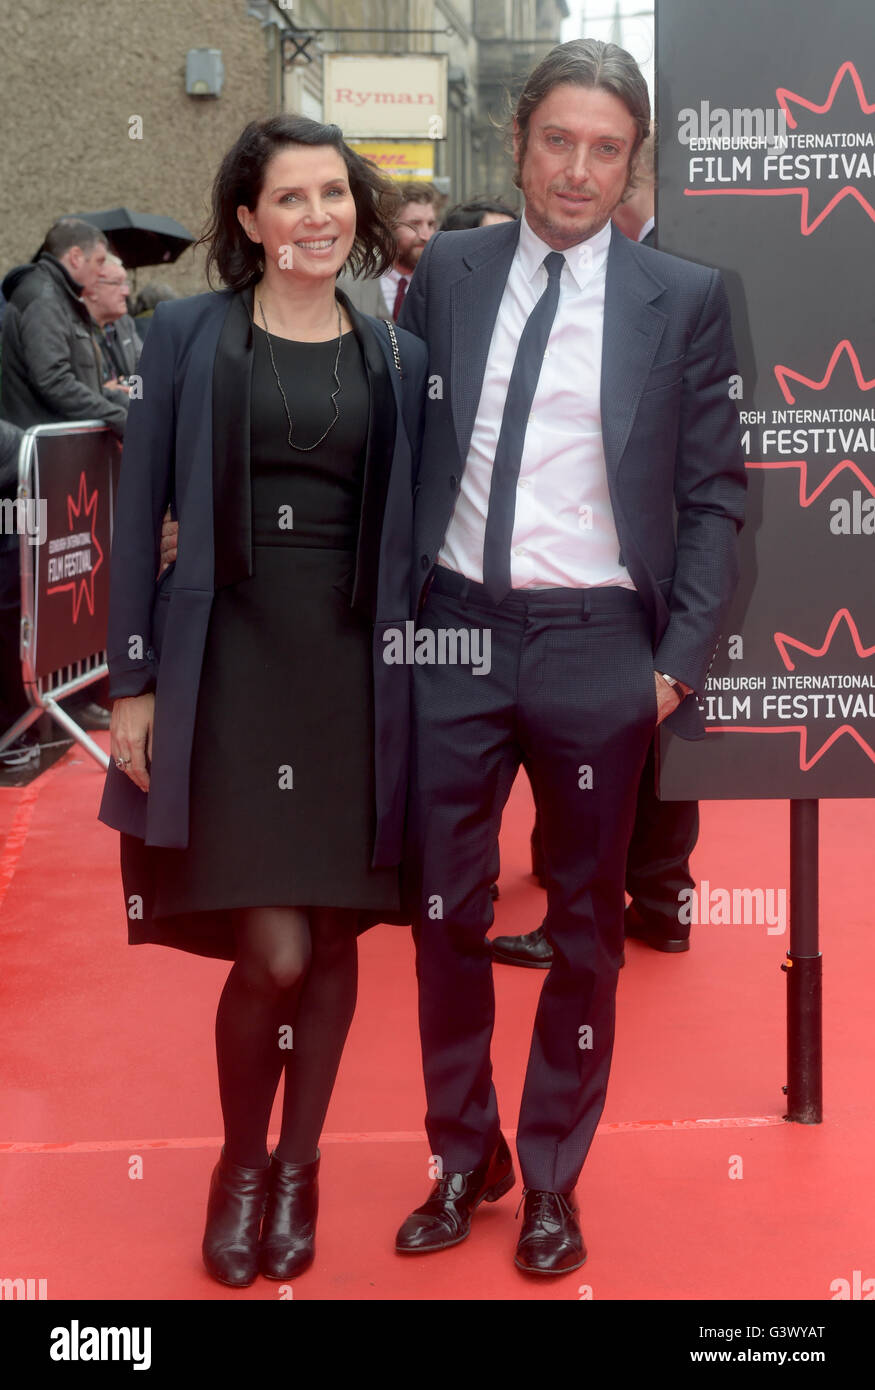 Sadie Frost and Darren Strowger attending the Edinburgh International Film Festival 2016 opening-night gala, and the world premiere of Tommy's Honour, at the Festival Theatre in Edinburgh, Scotland. Stock Photo